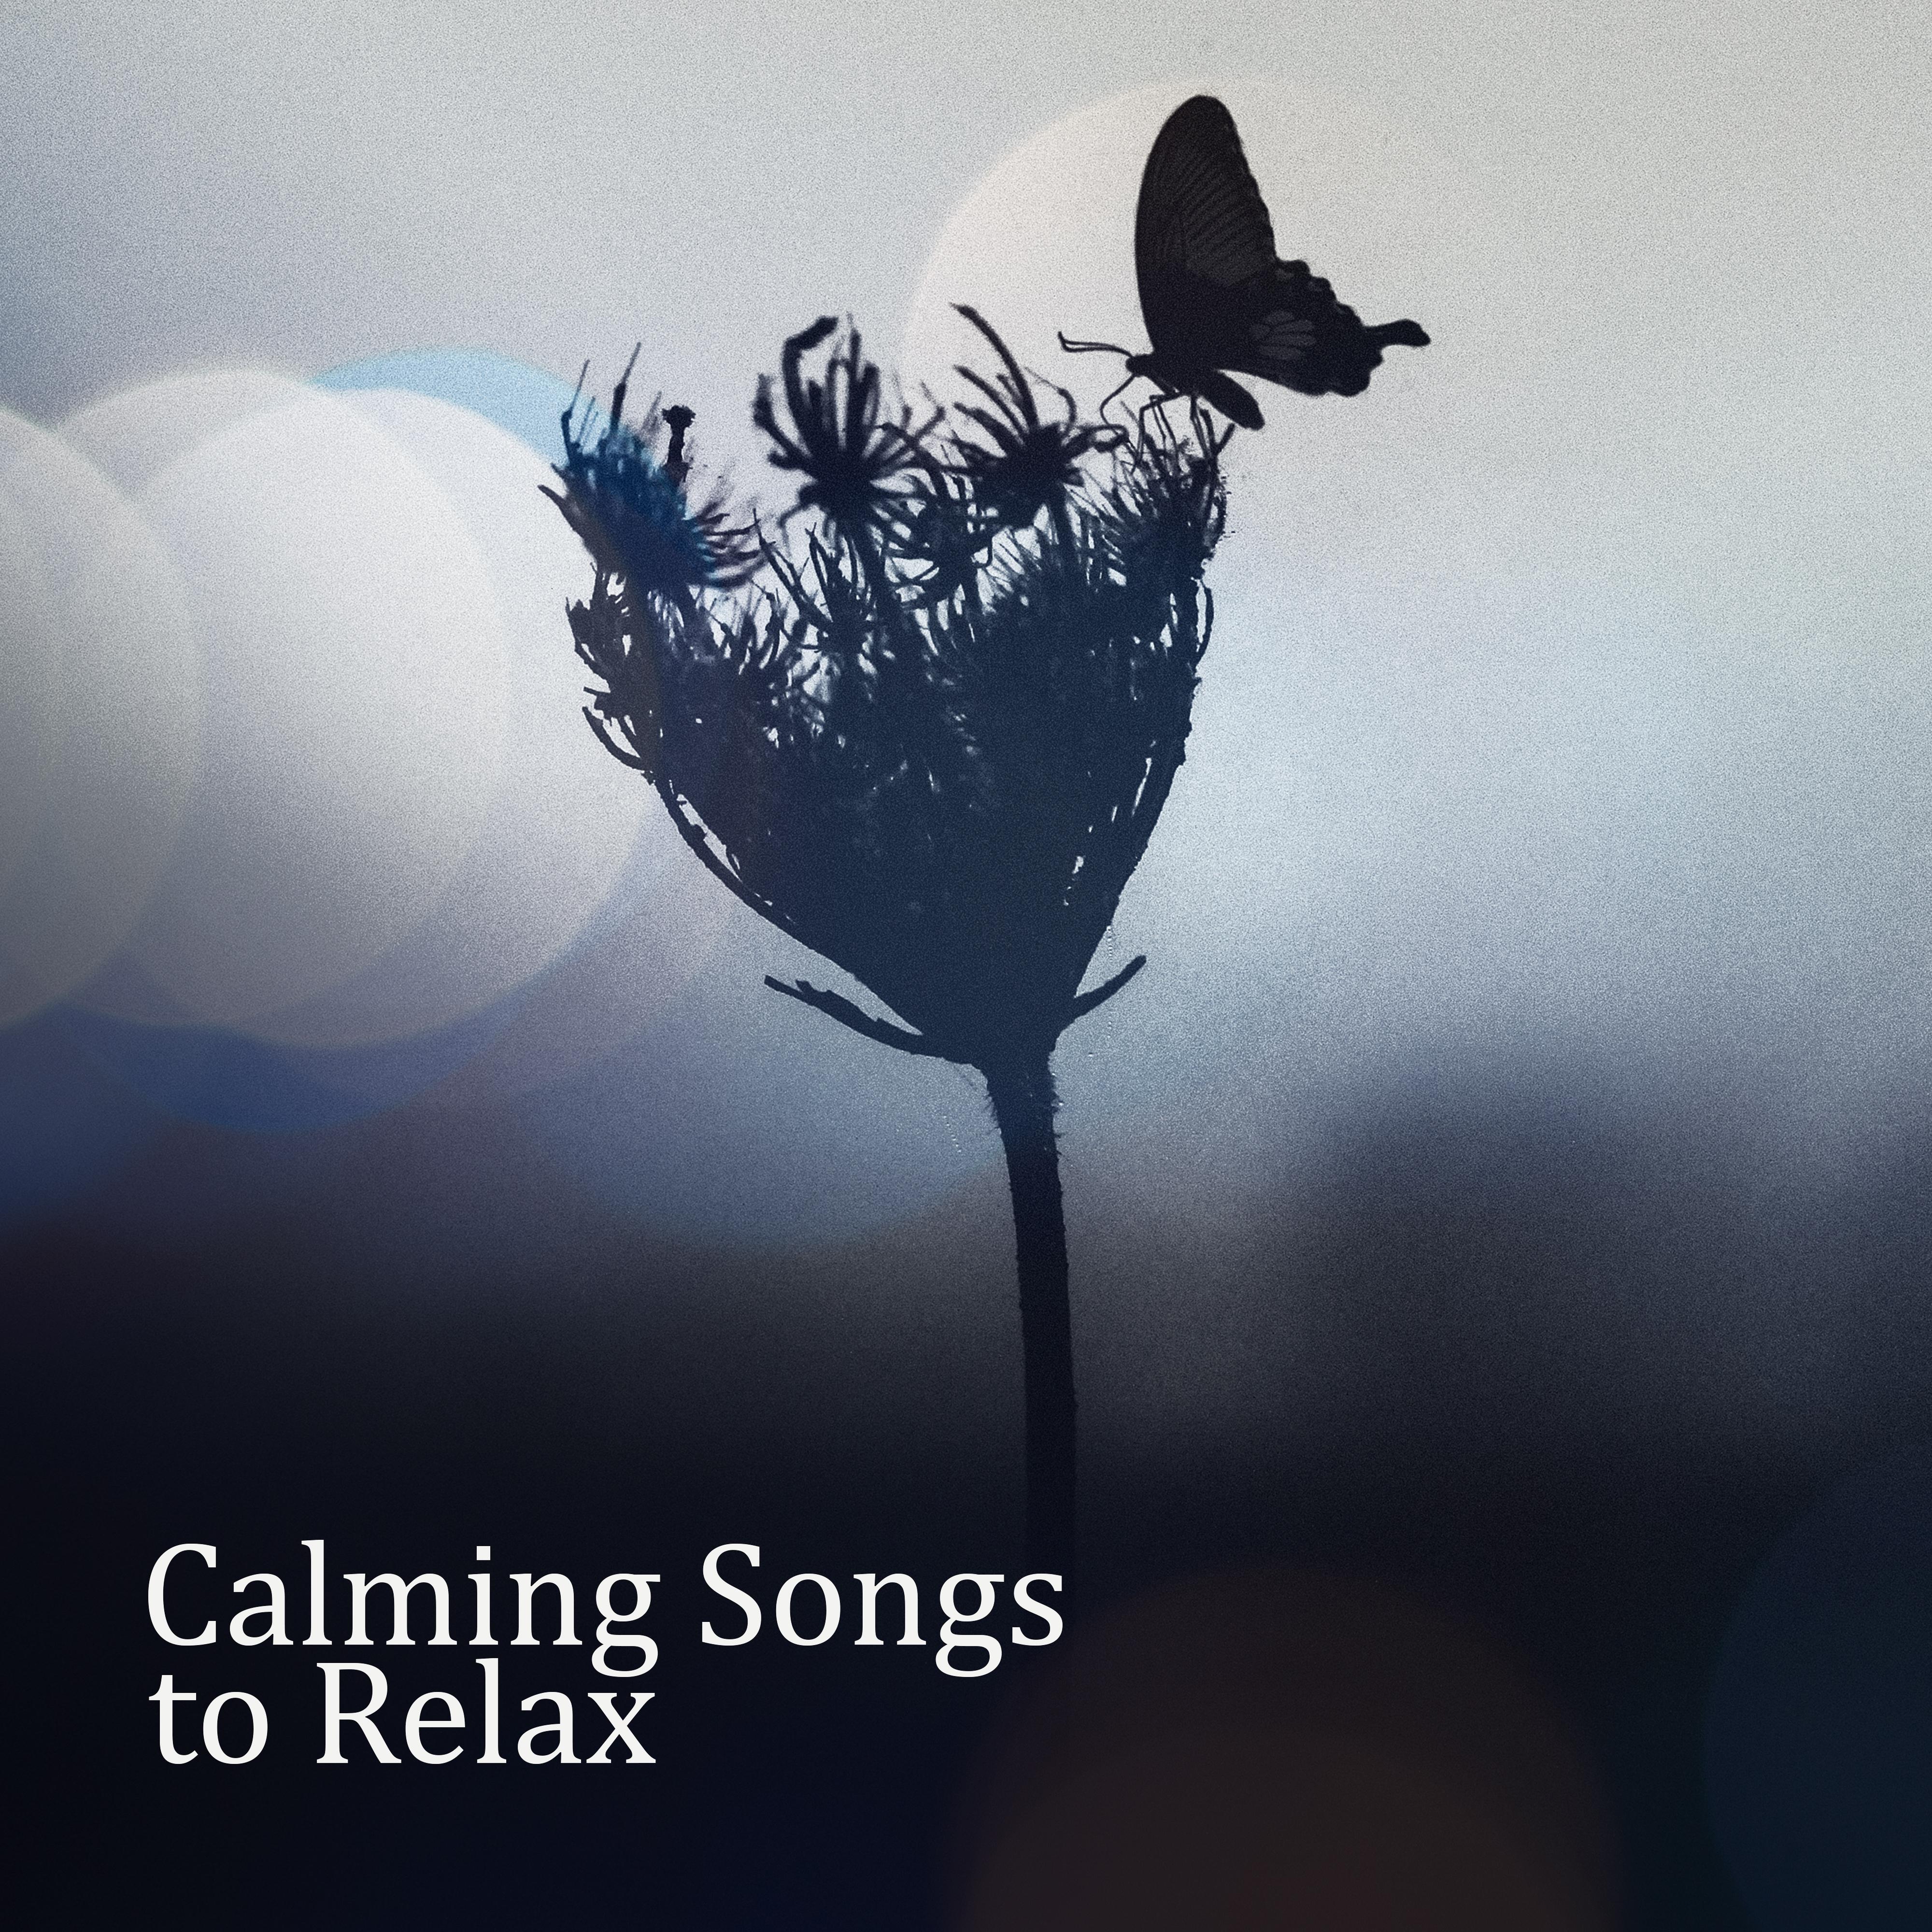 Calming Songs to Relax